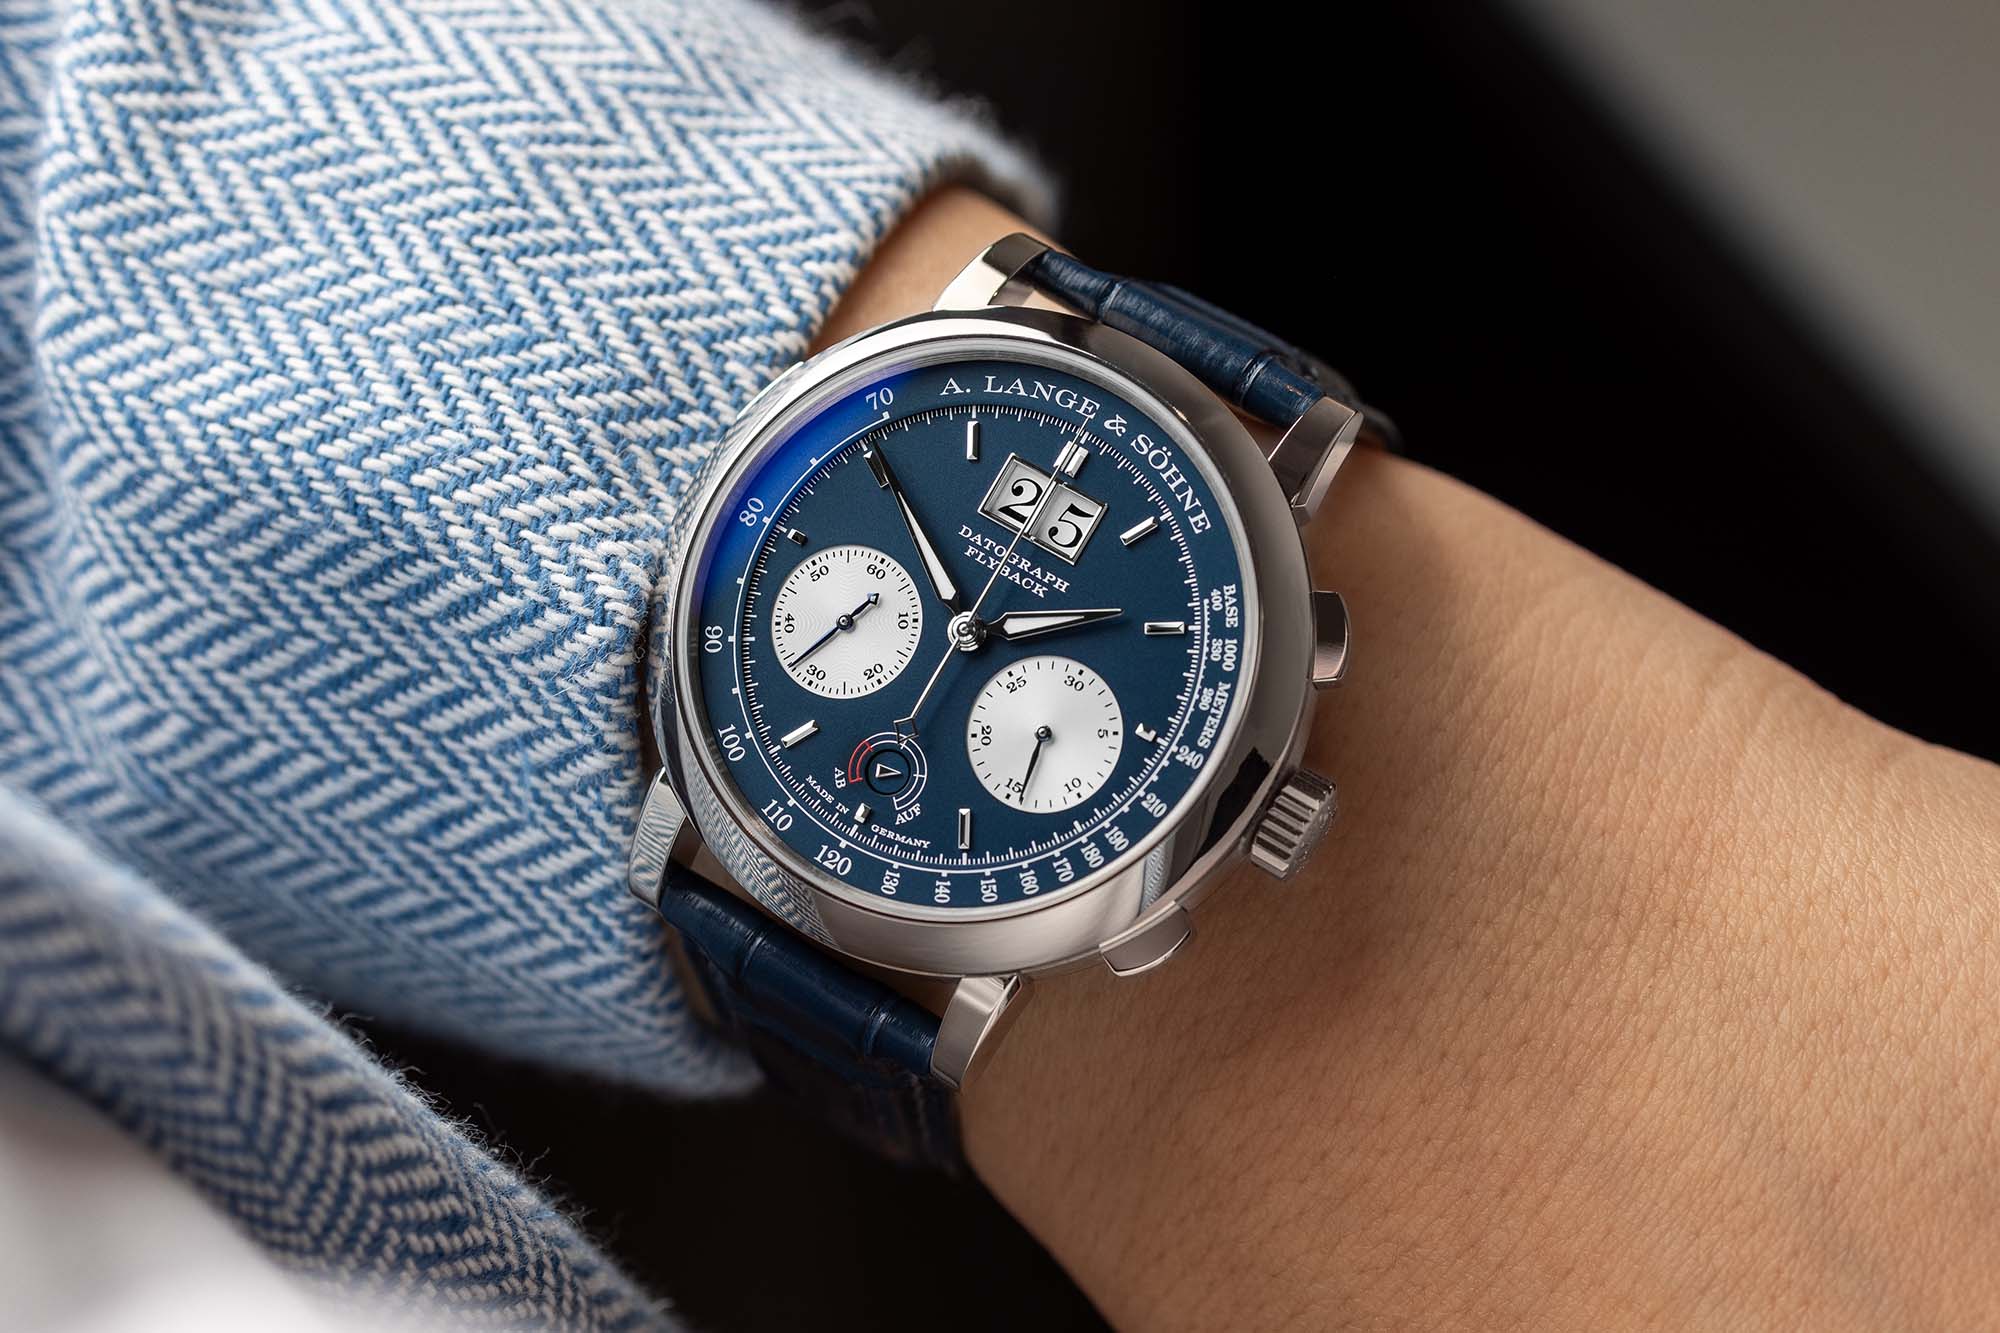 A. Lange & Söhne Celebrates 25 Years of the Datograph